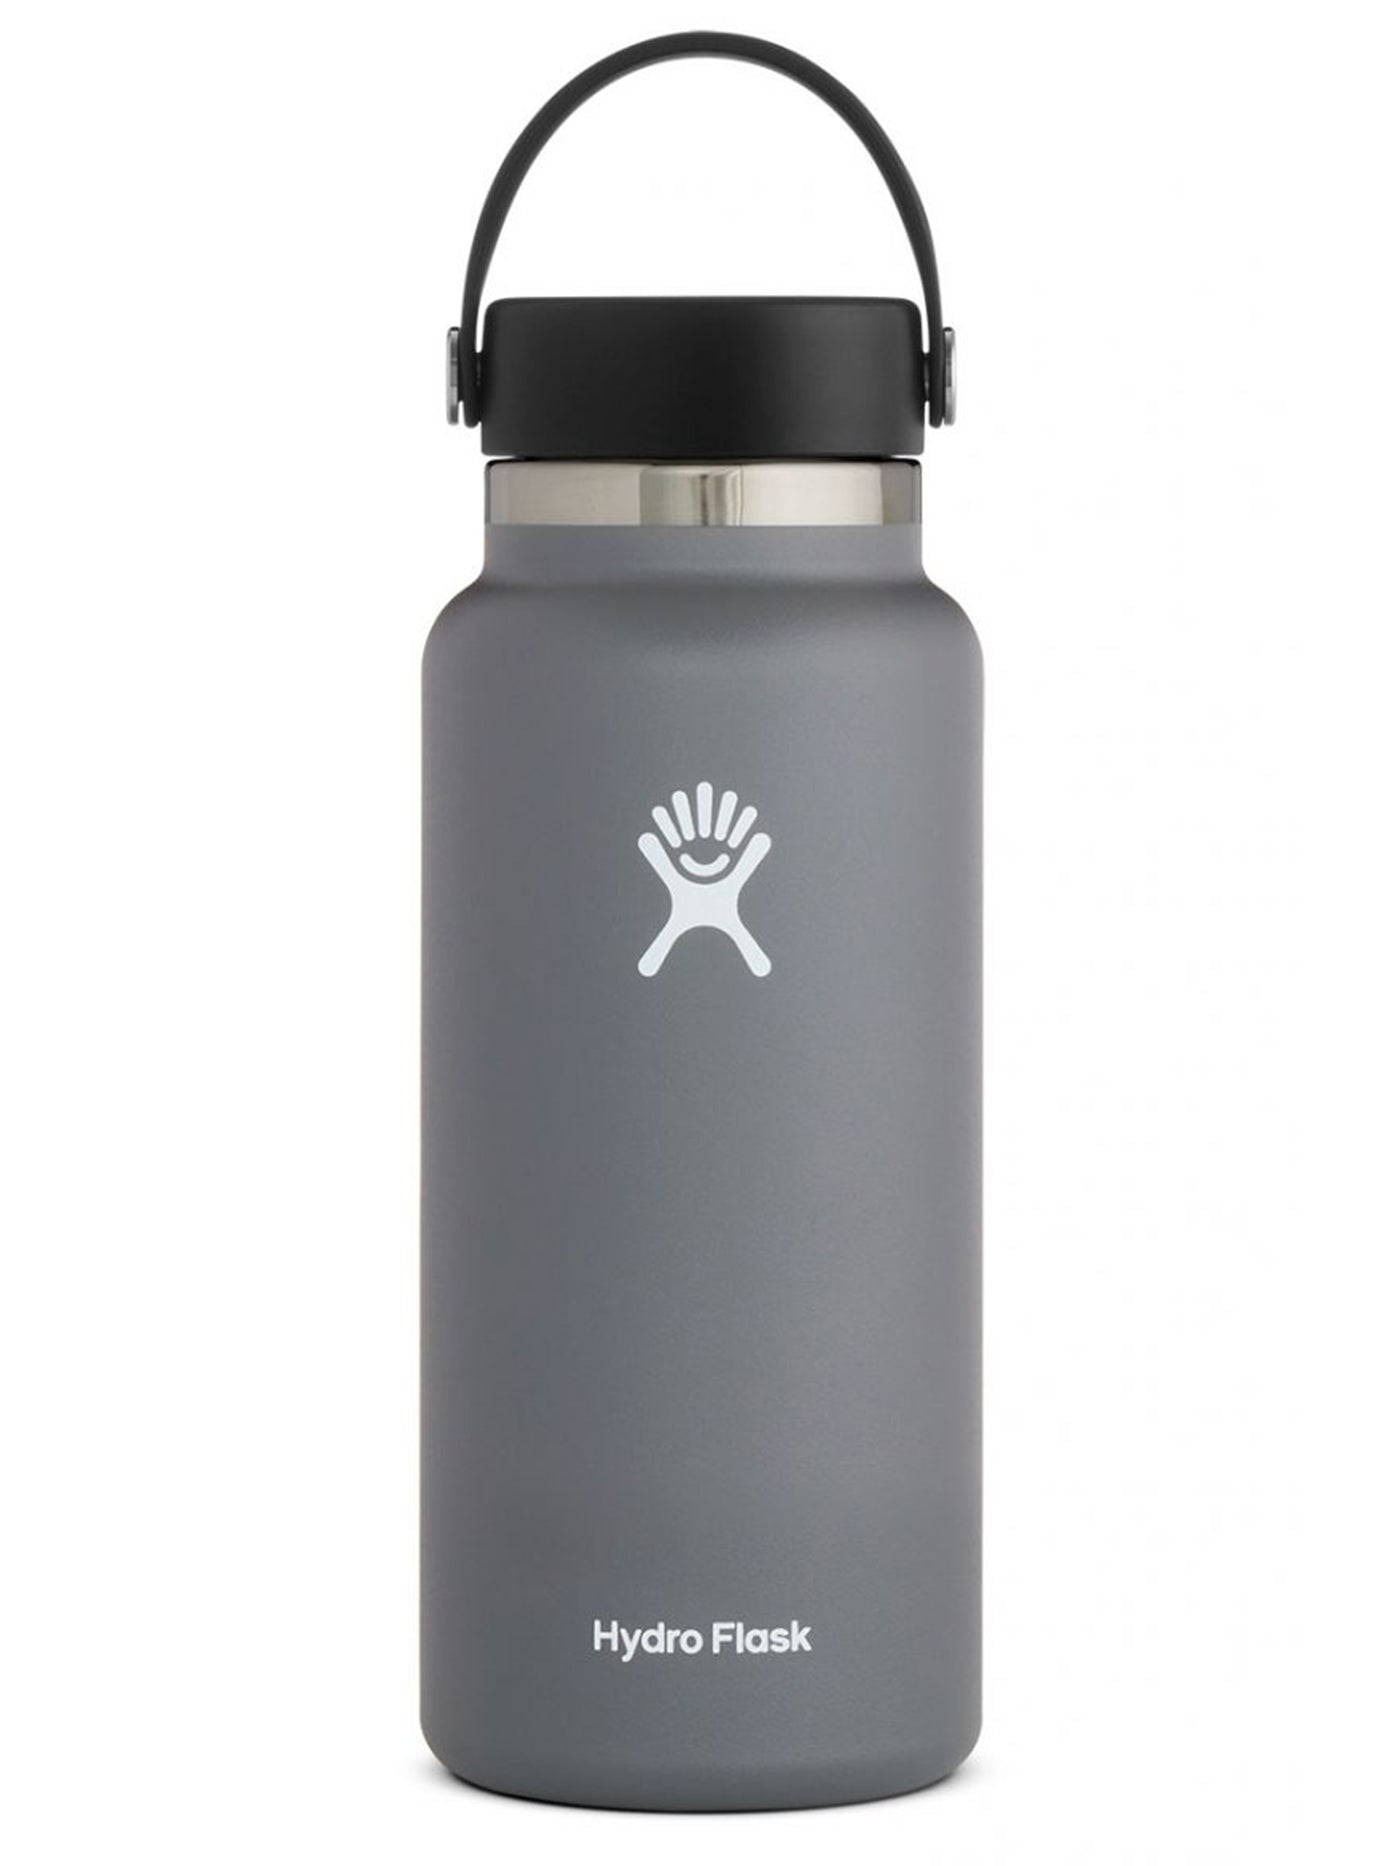 Hydro Flask 12L Carryout Soft Cooler - Hike & Camp